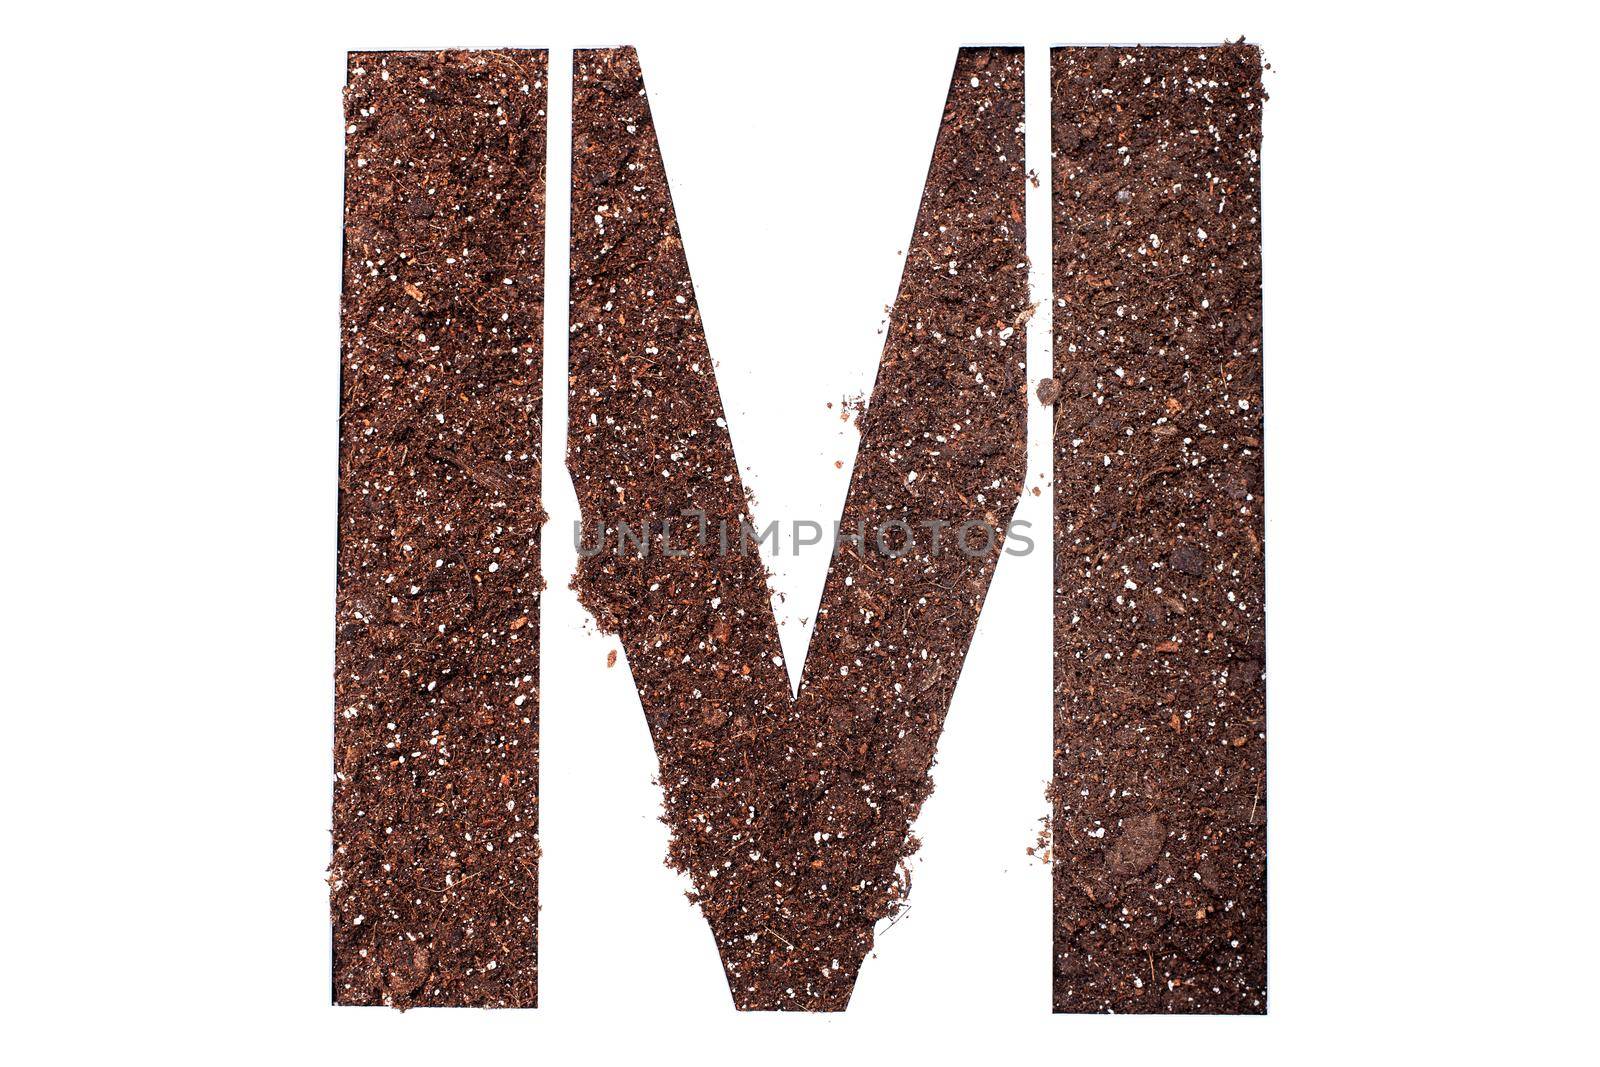 stencil letter M made above dirt on white surface by kokimk